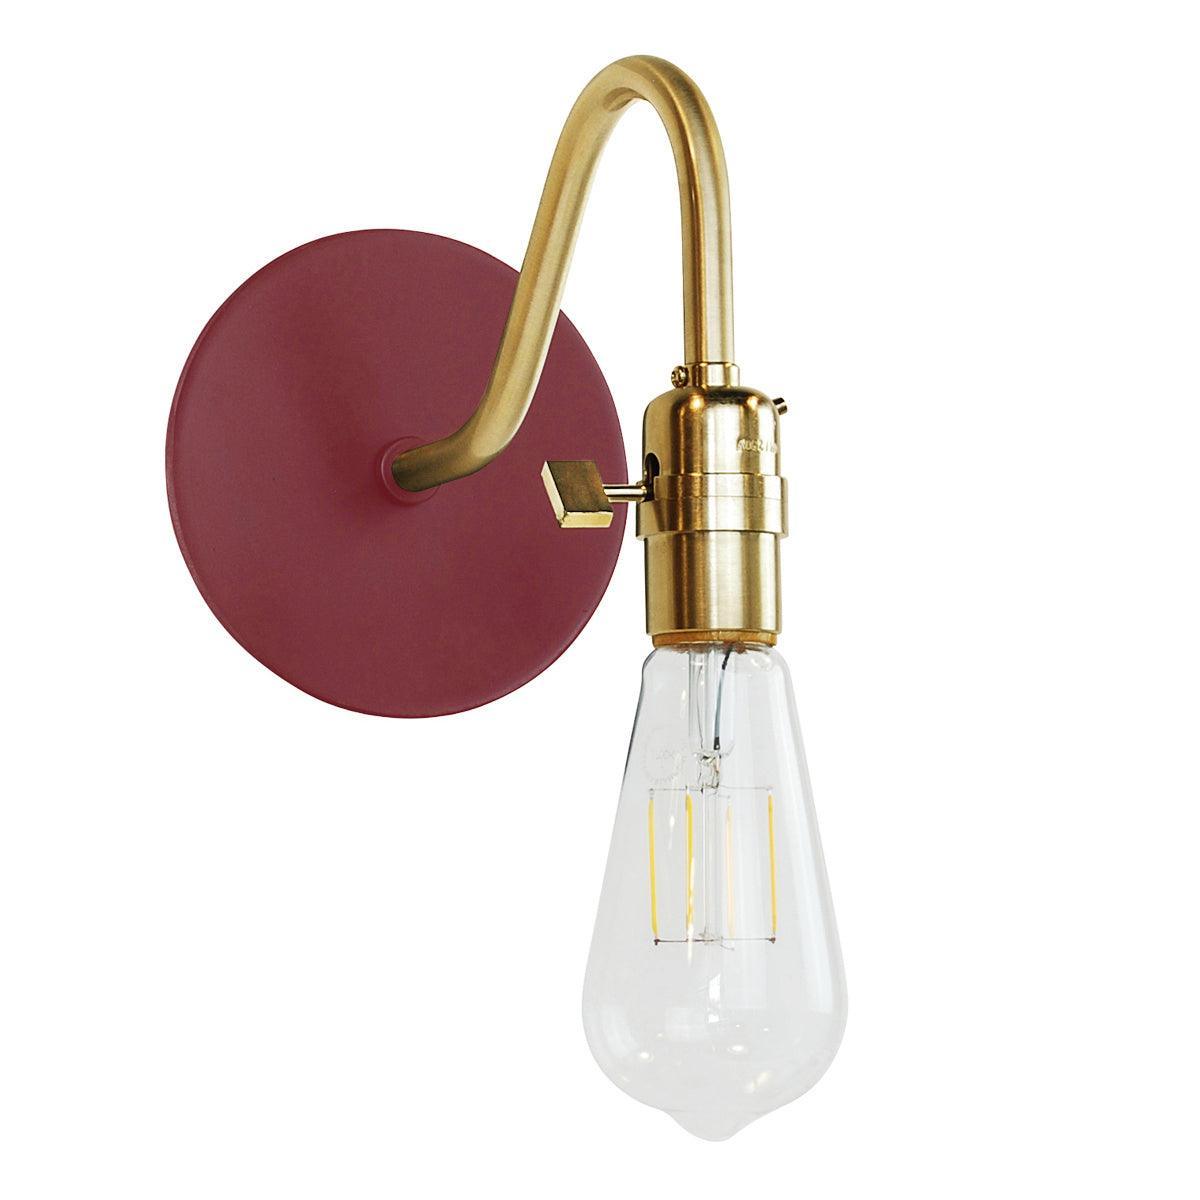 Montclair Light Works - Uno SCL400 Wall Sconce - SCL400-55-91 | Montreal Lighting & Hardware